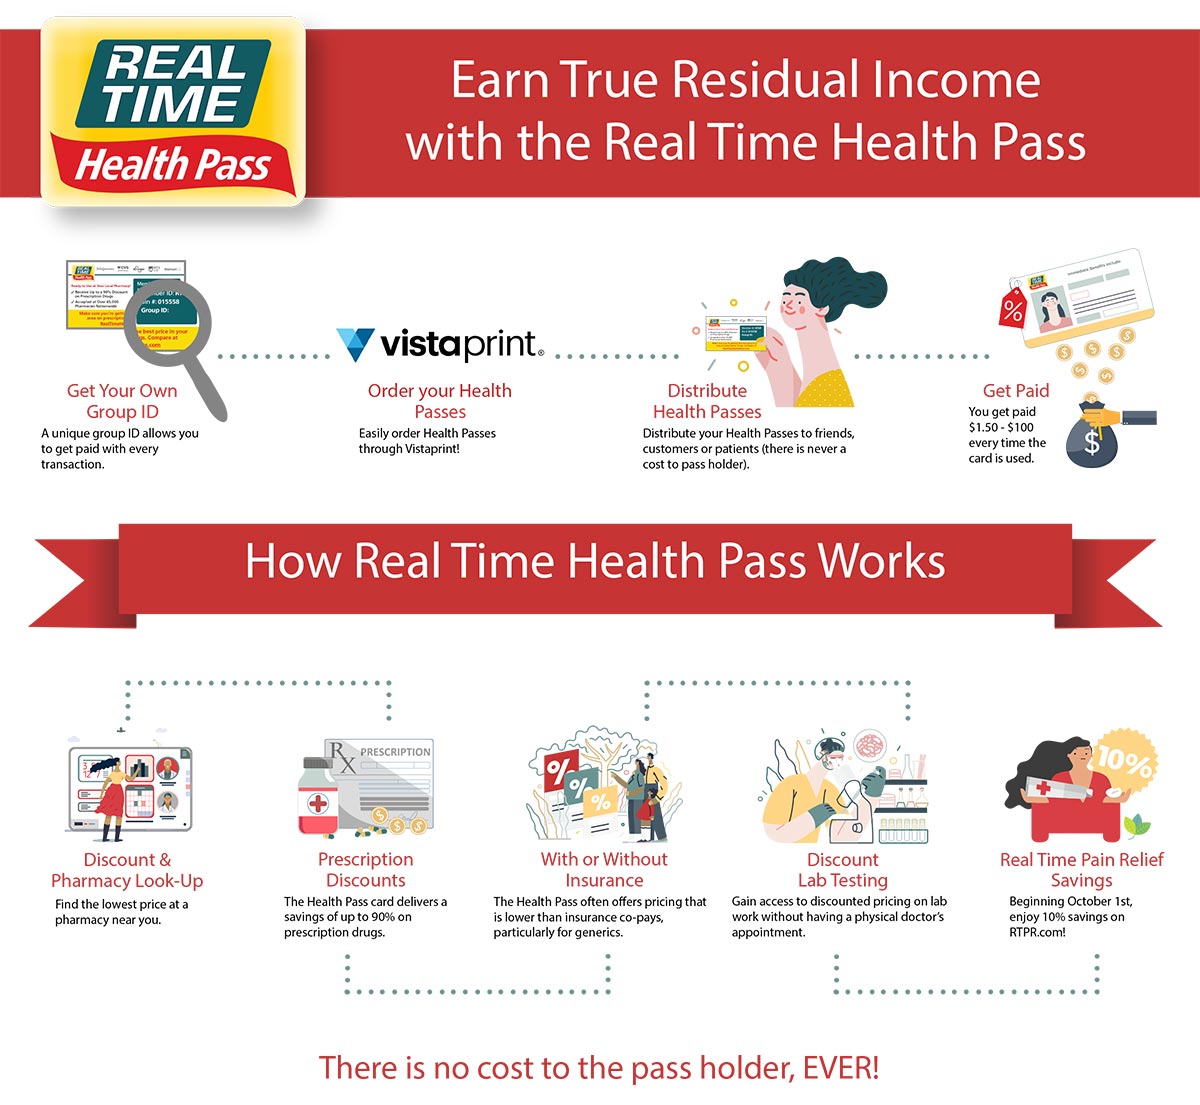 Earn True Residual Income with the Real Time Health Pass